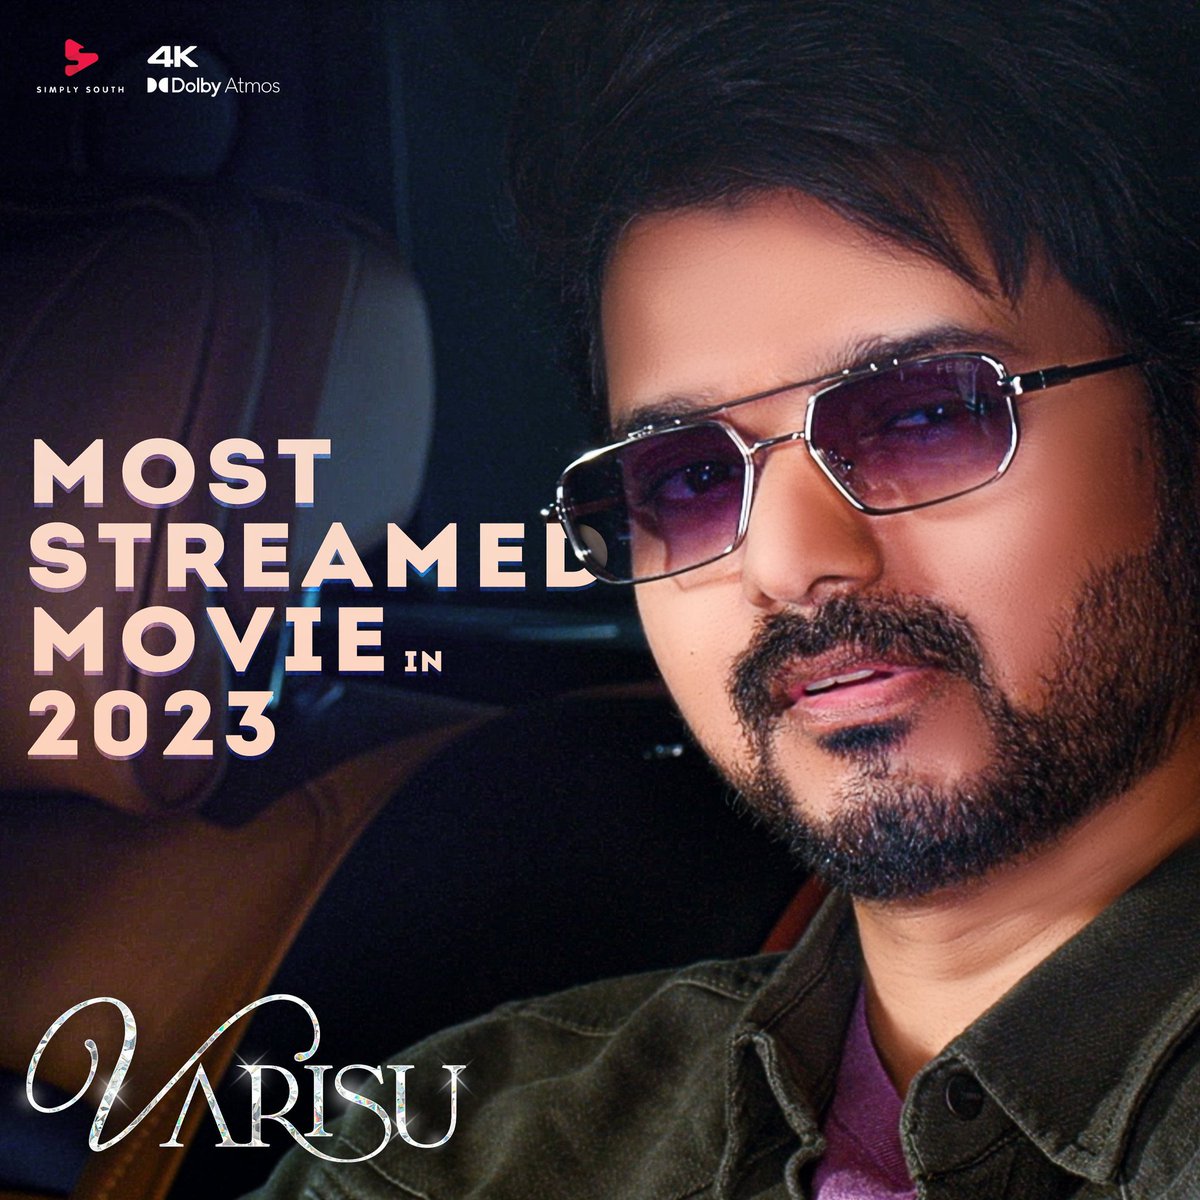 Then theatres now in OTT too #Varisu creating new records 🔥💥💥 becomes the most streamed movie in 2023 on #SIMPLYSOUTH platform excluding india 
@actorvijay na #Leo